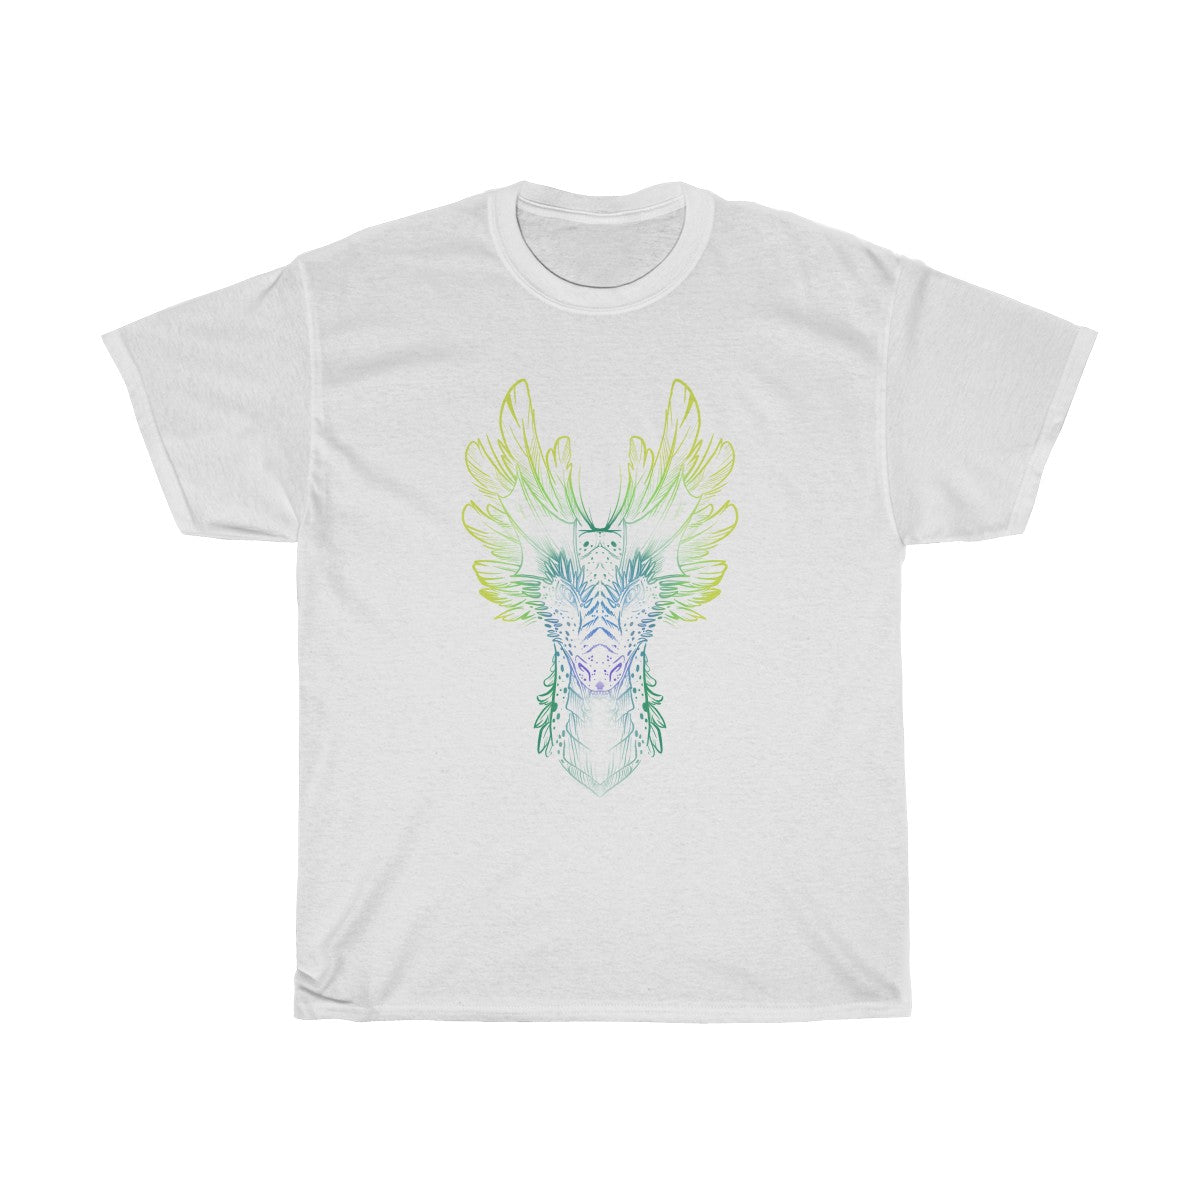 Drake Colored - T-Shirt T-Shirt Dire Creatures White S 